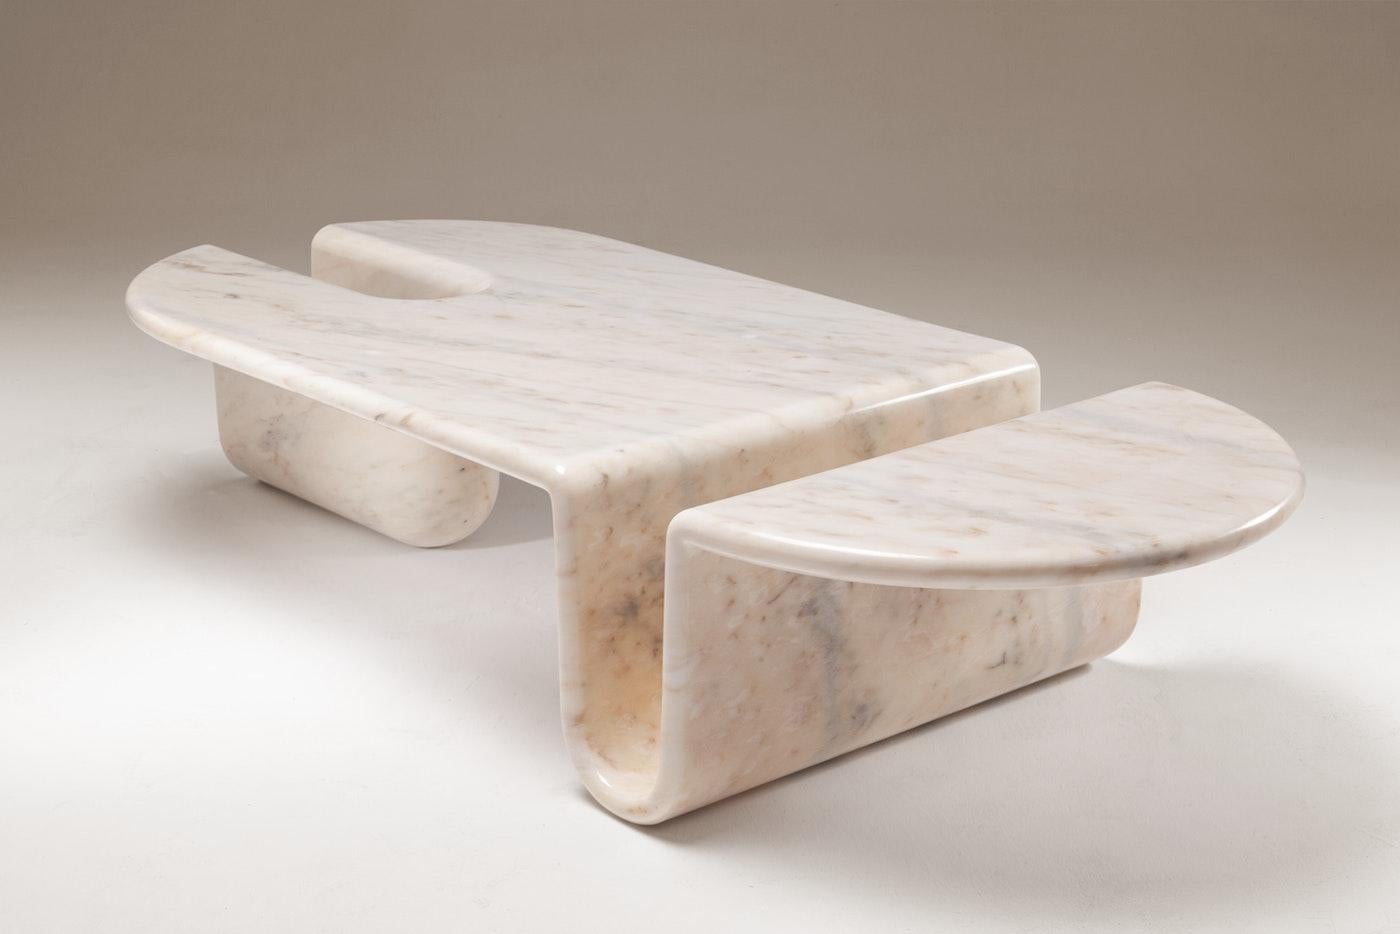 Bonnie and Clyde center table by Dooq
Measures: W 160 cm 63”
D 70 cm 28”
H 35 cm 14”

Materials: Structure carved from one solid marble piece

Dooq is a design company dedicated to celebrate the luxury of living. Creating designs that